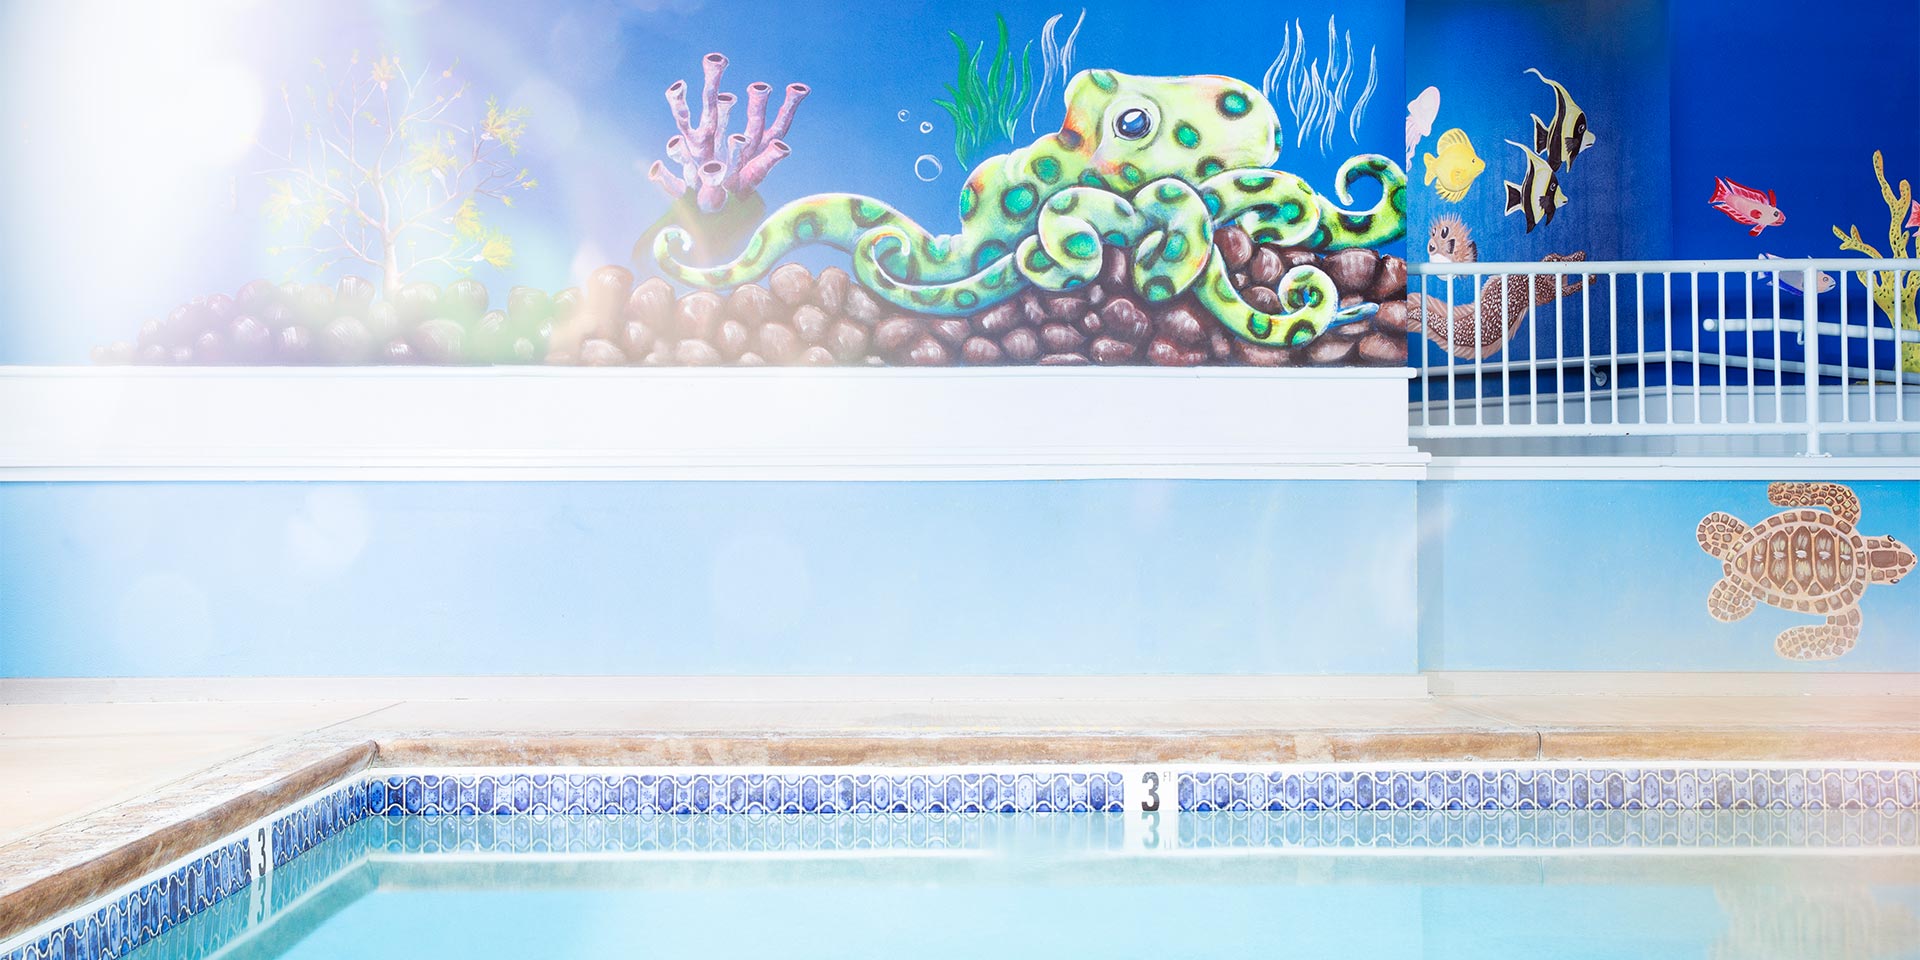 indoor pool with sea creatures painted on the walls